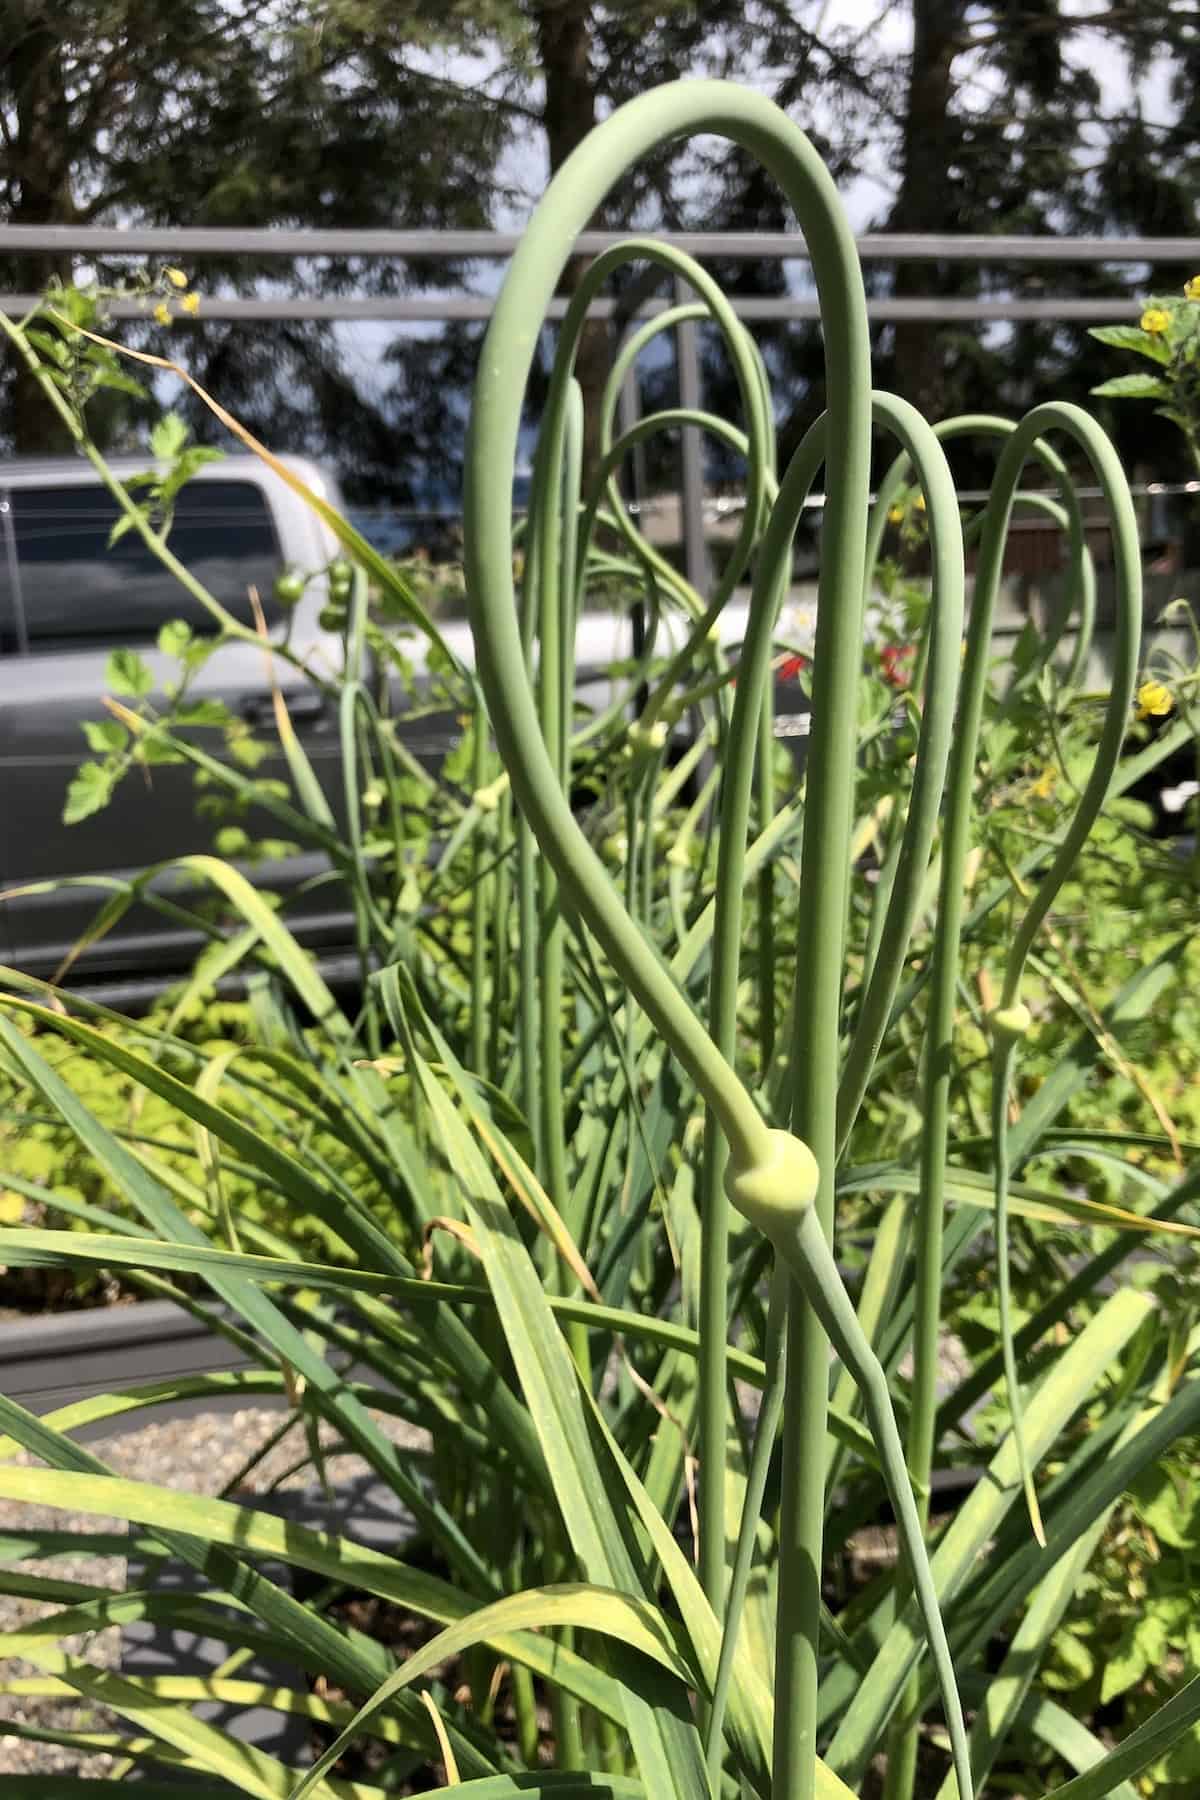 Garlic scapes growing in backyard raised bed garden